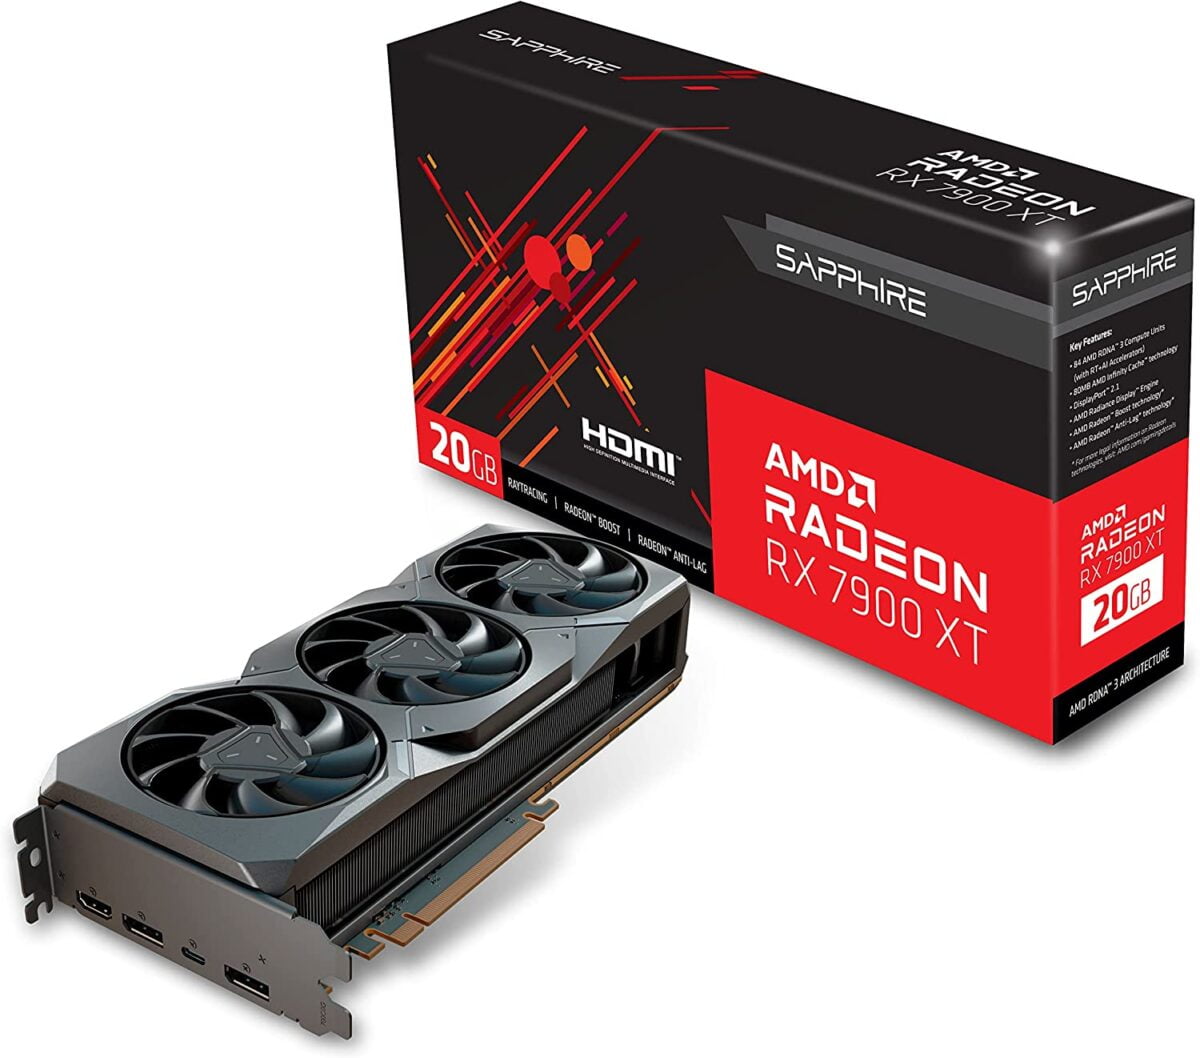 Sapphire 21322-01-20G, 21323-01-20G AMD Radeon RX 7900 XTX Gaming Graphics Card Listed on Amazon US